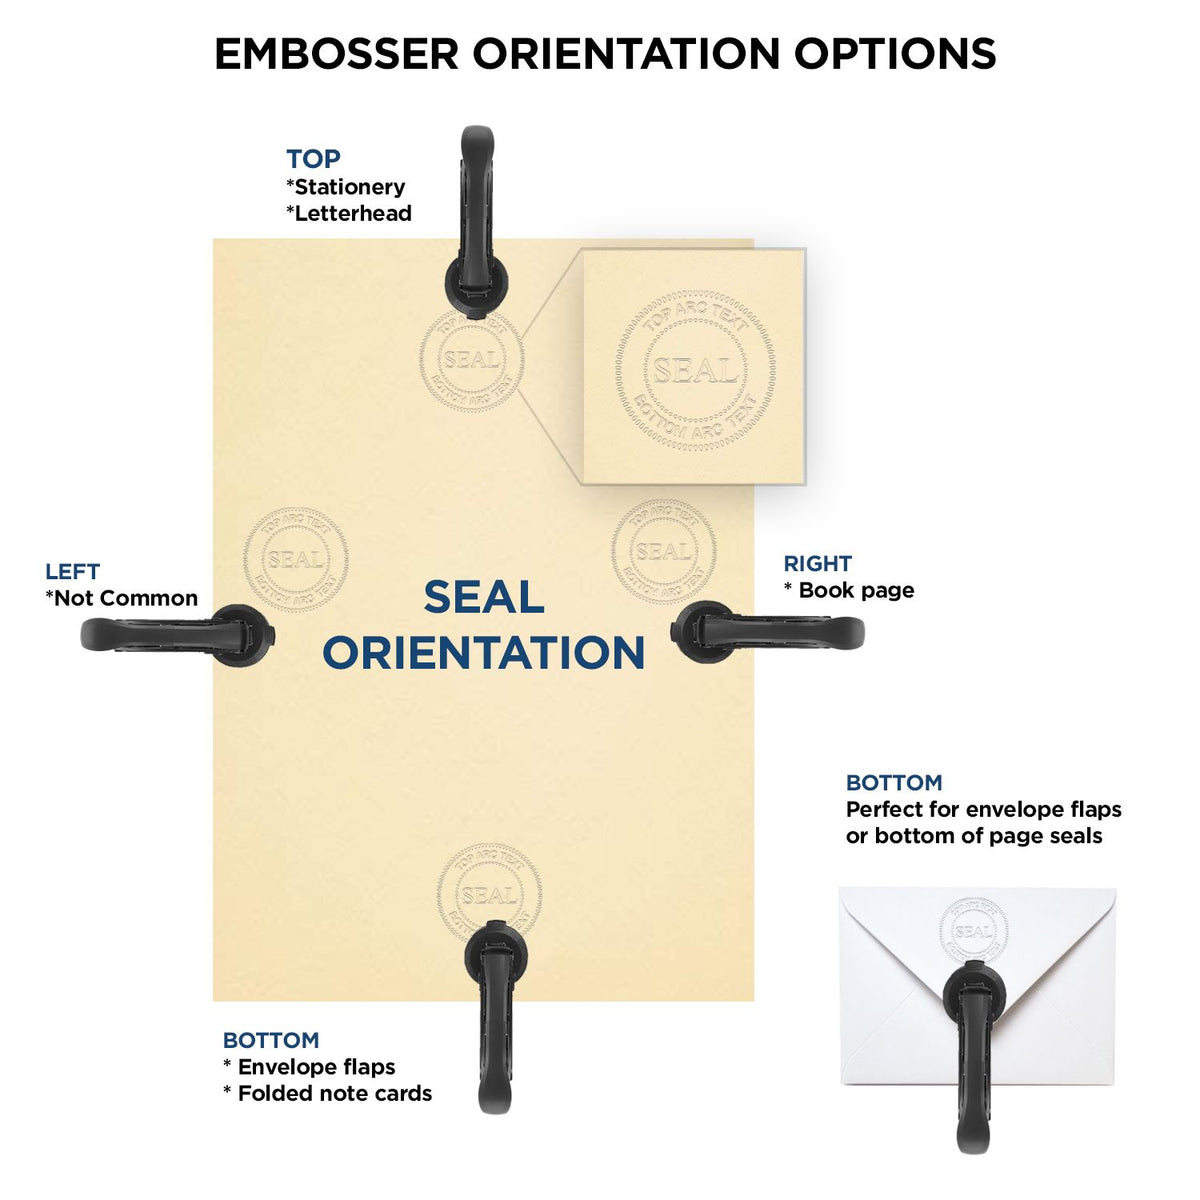 An infographic for the State of Mississippi Extended Long Reach Engineer Seal showing embosser orientation, this is showing examples of a top, bottom, right and left insert.